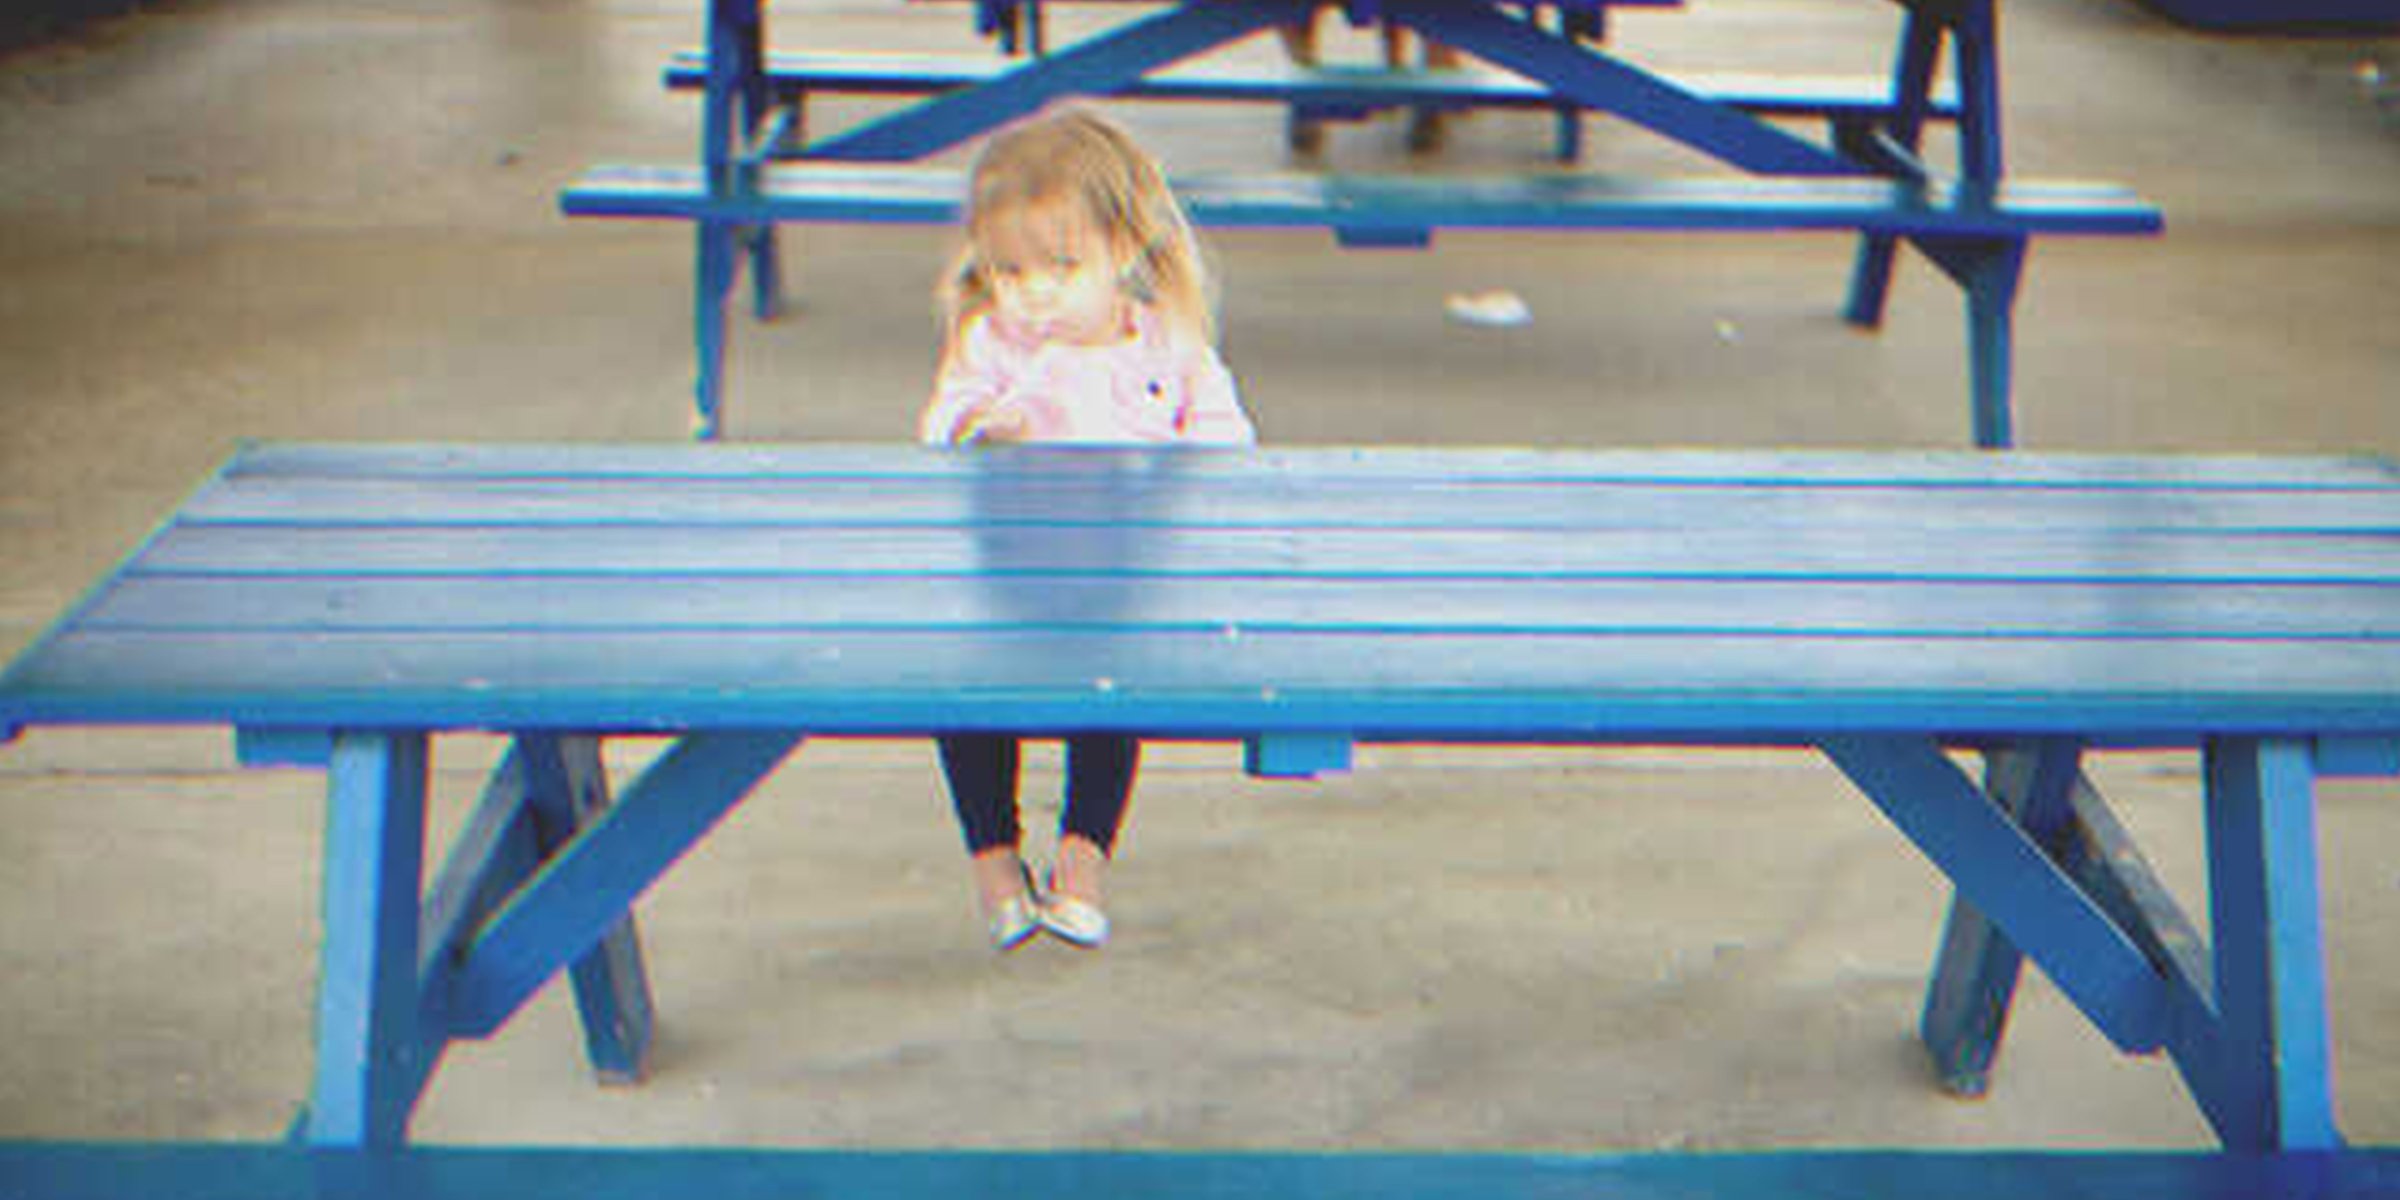 Lonely little girl sitting on a bench | Source: Shutterstock